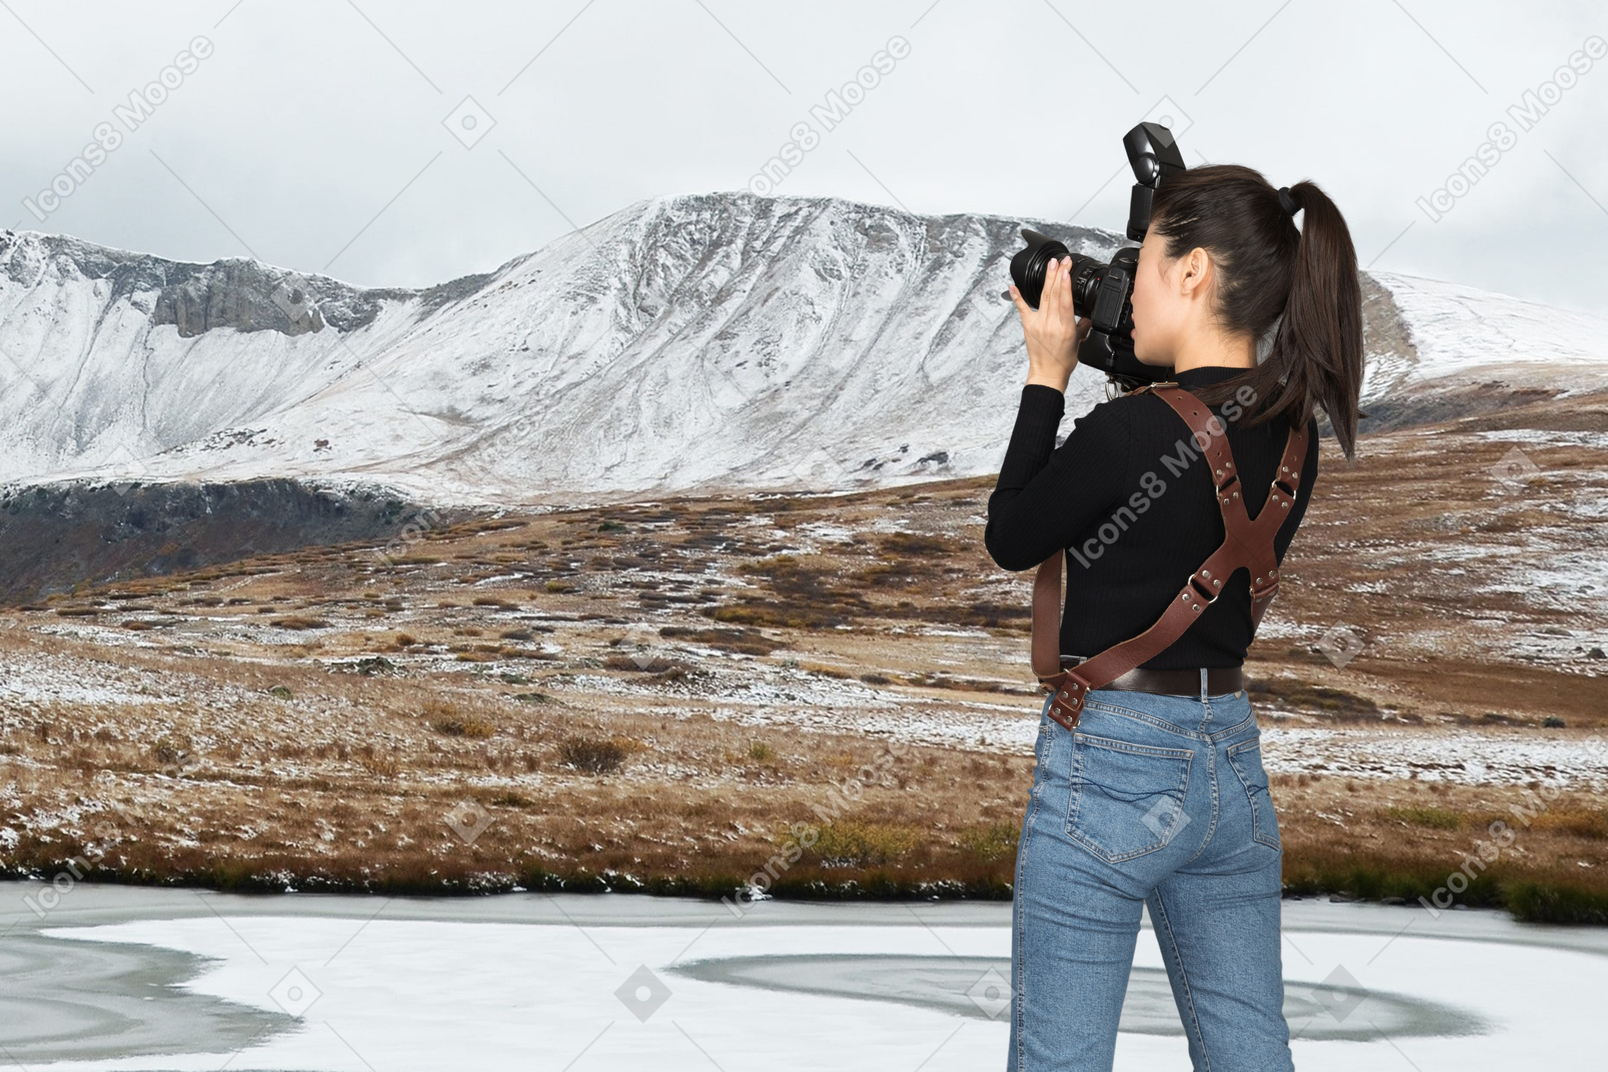 A photographer taking a picture of a landscape